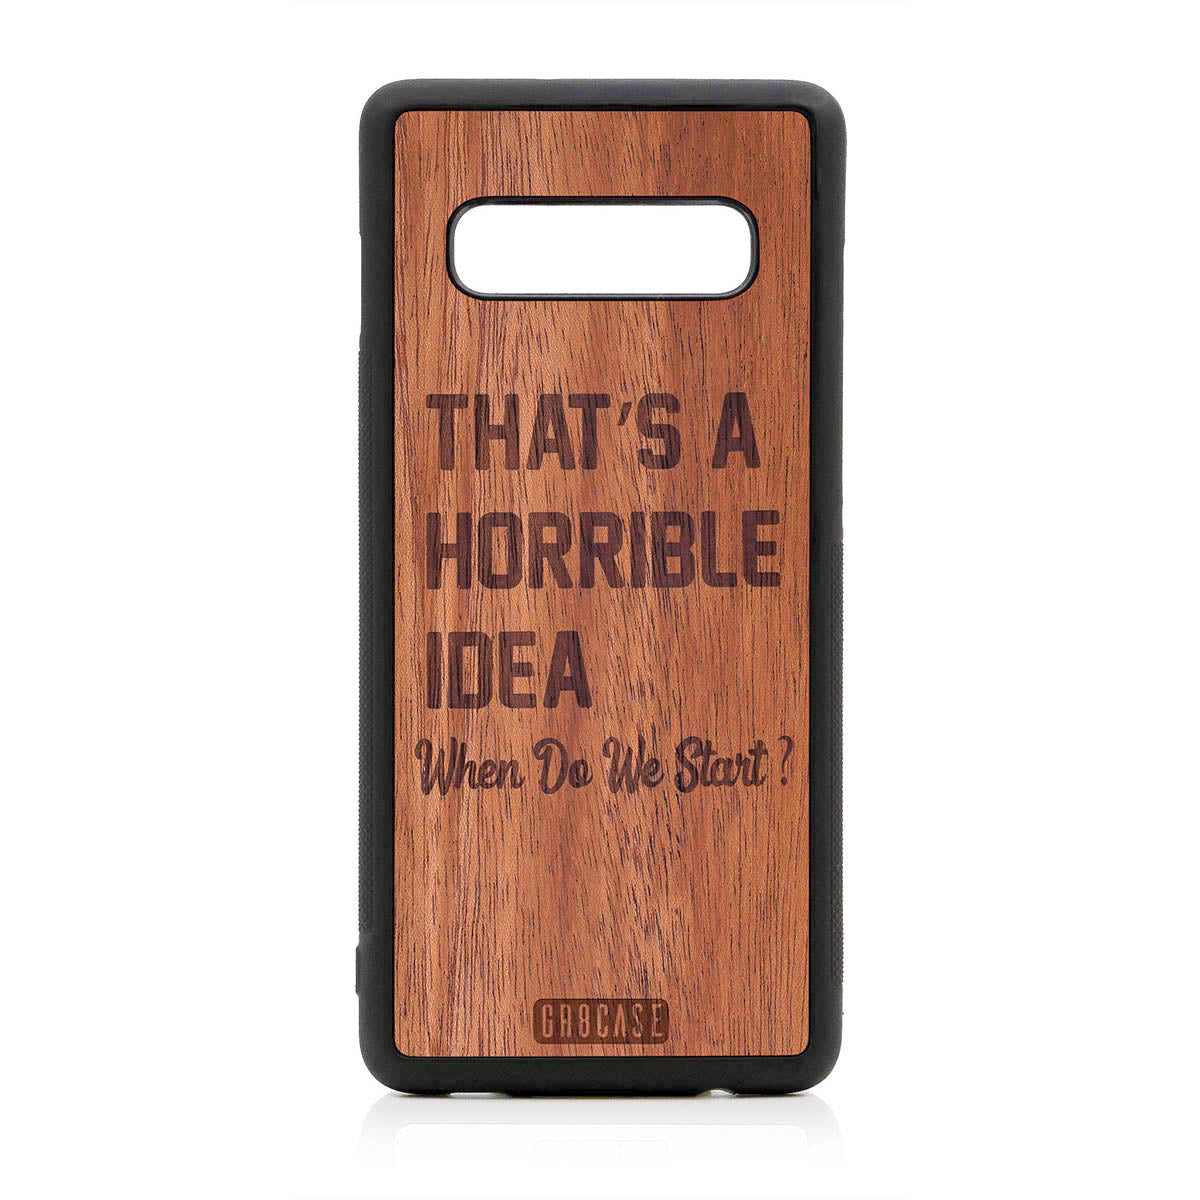 That's A Horrible Idea When Do We Start? Design Wood Case For Samsung Galaxy S10 Plus